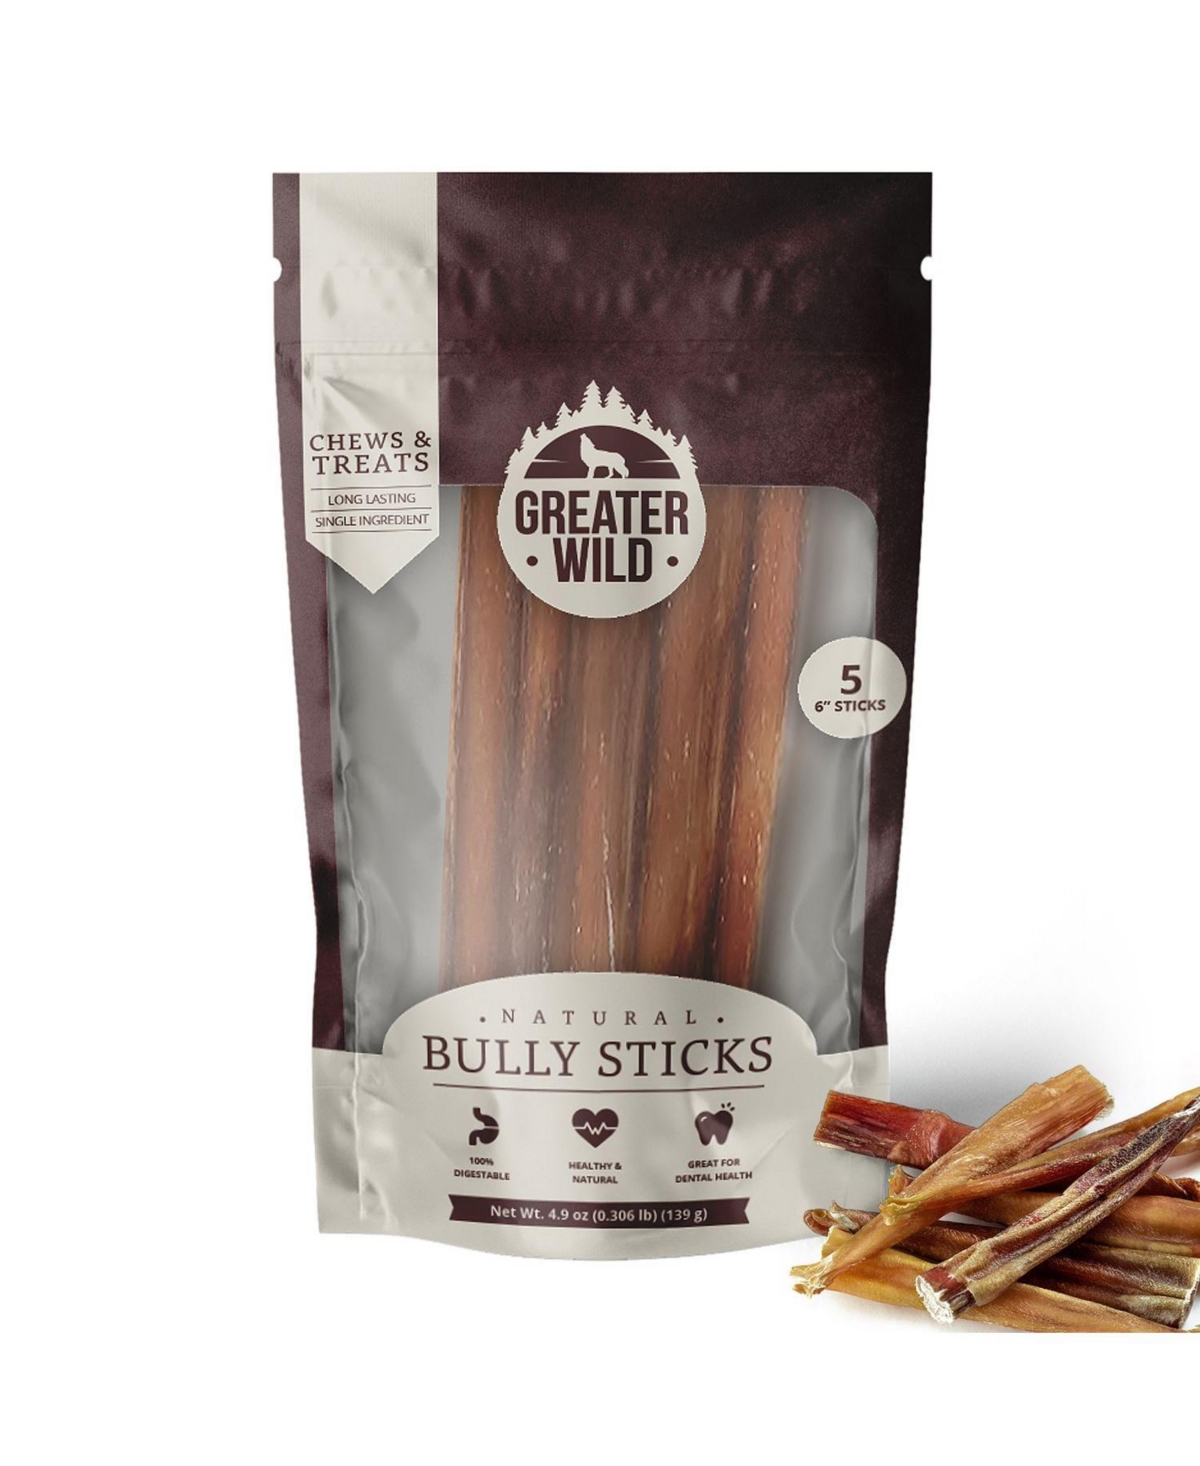 6" Single-Ingredient Beef Bully Sticks, All-Natural Dog Treats - 5 Sticks - Brown